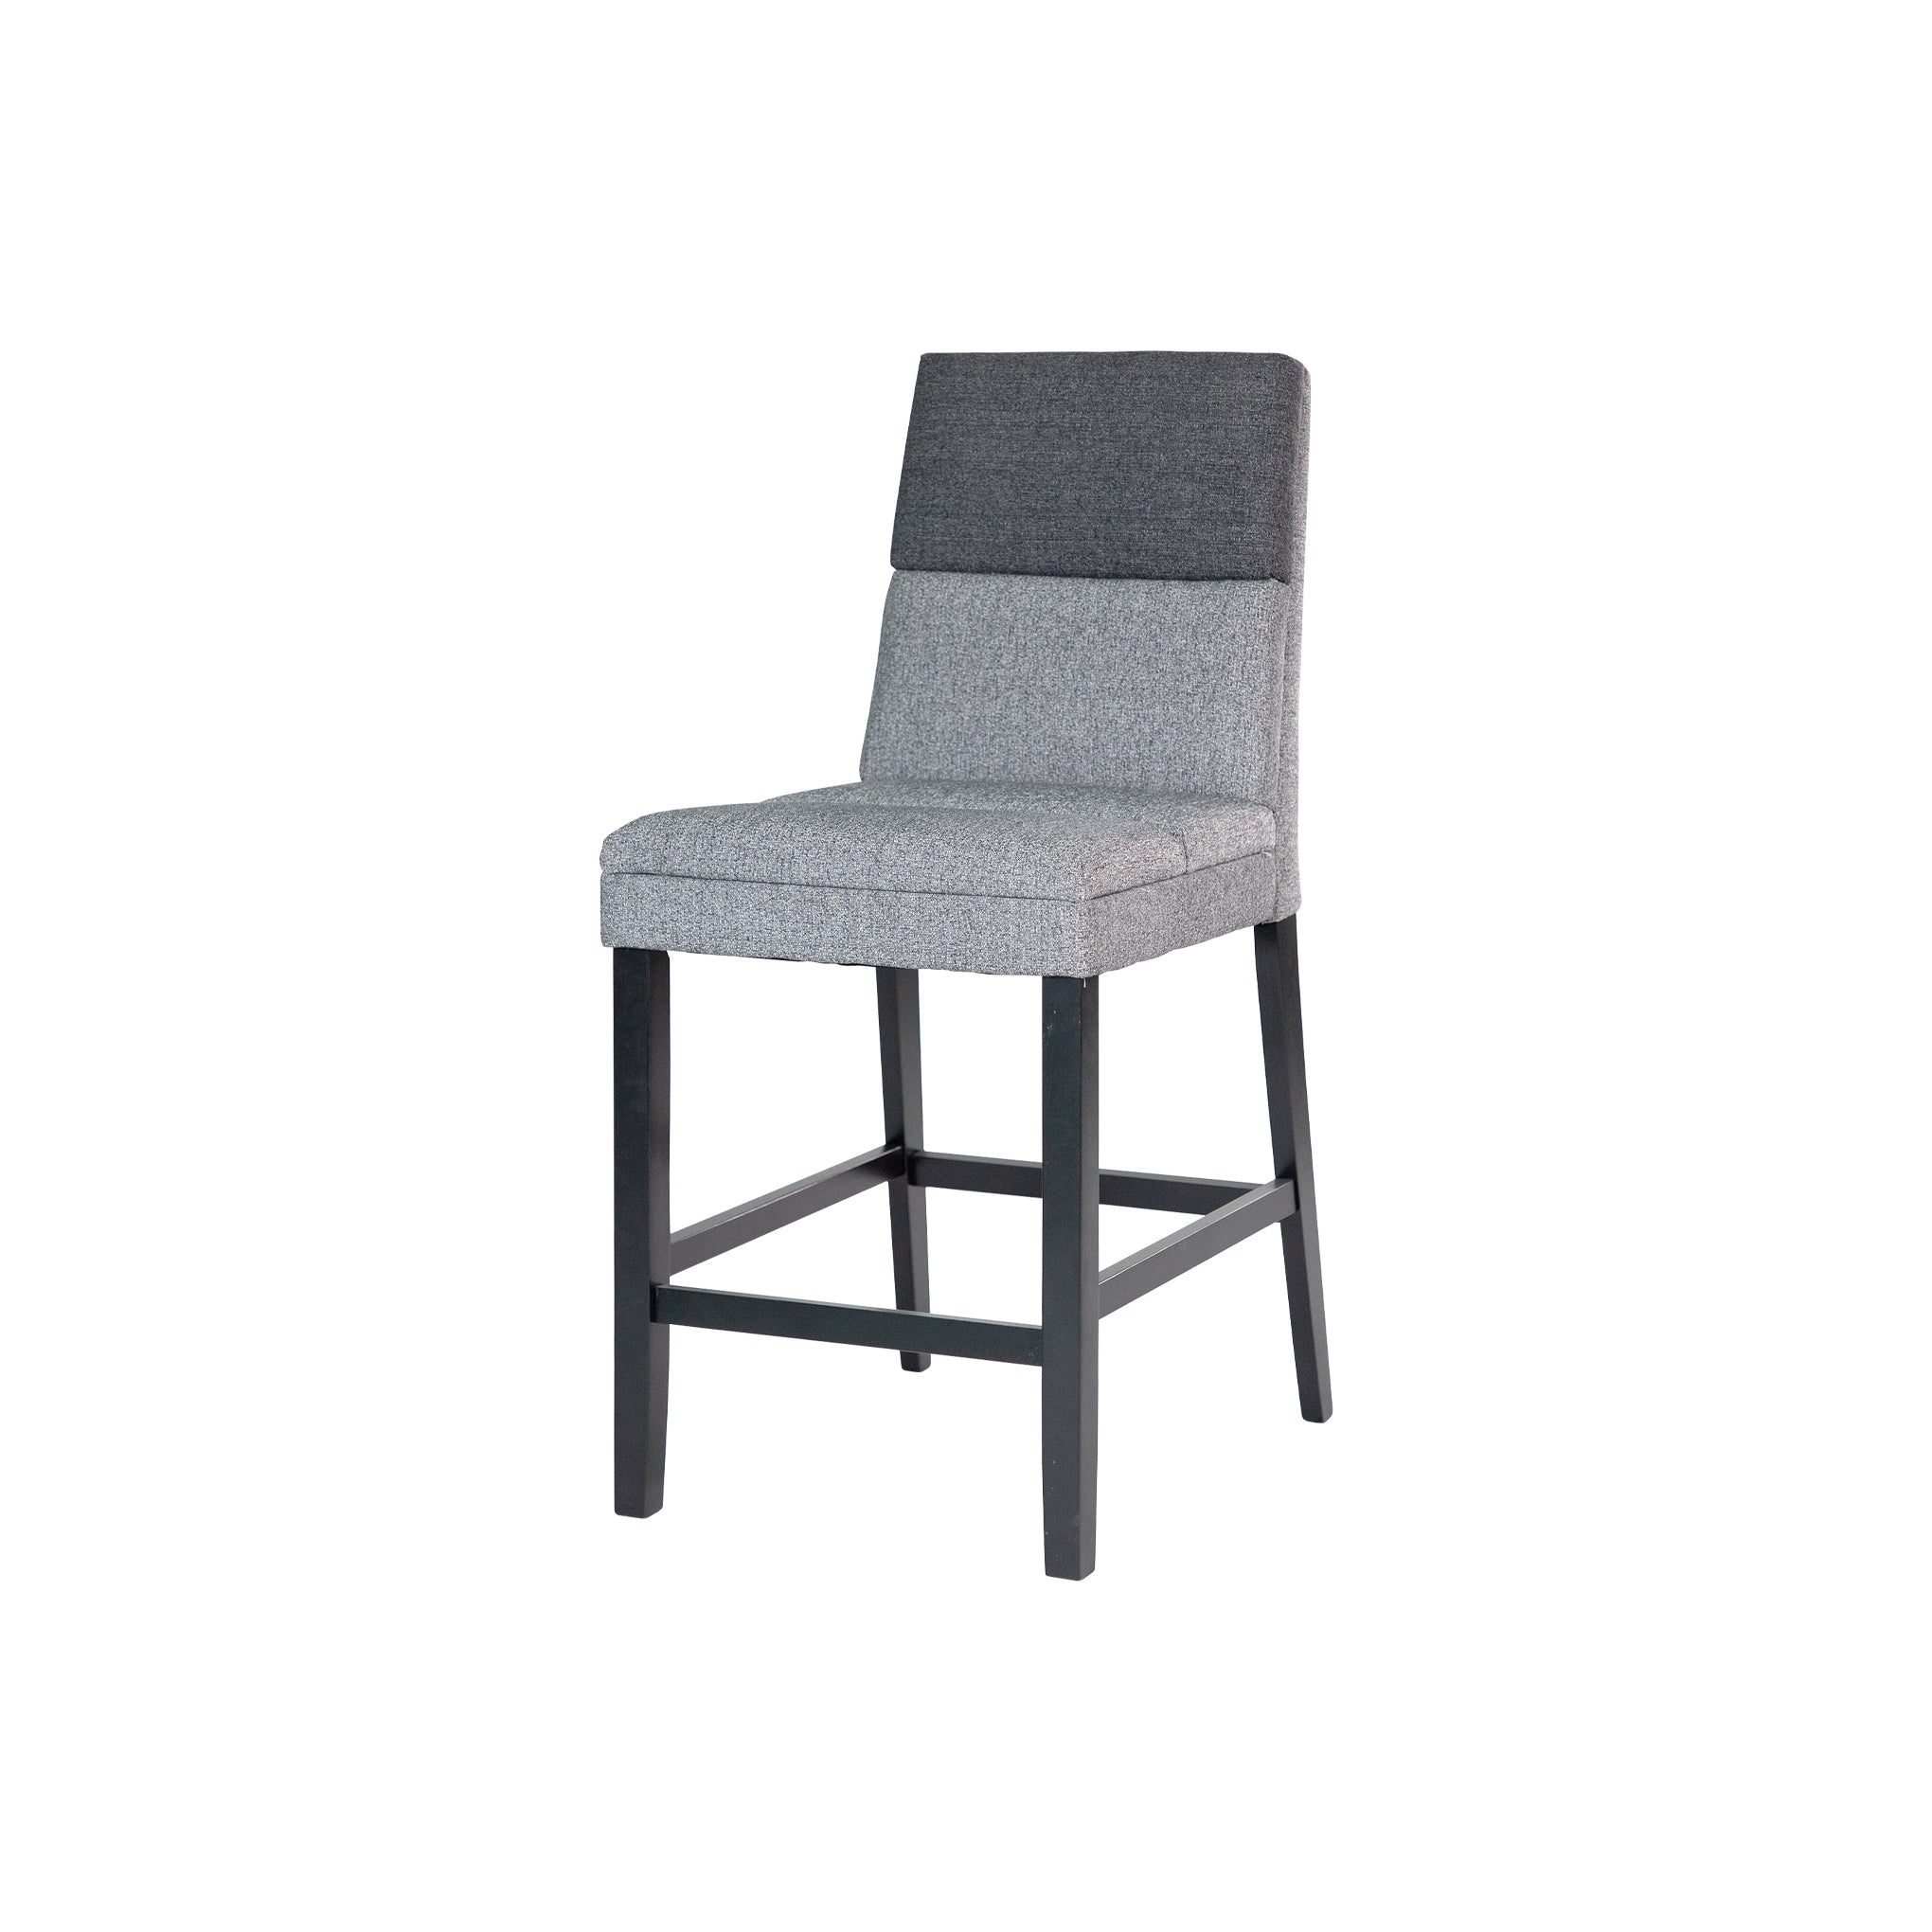 <b> Nomoty Counter Height Dining Chair </b><br>W450 X D590 X H980MM SEAT HEIGHT : 600MM